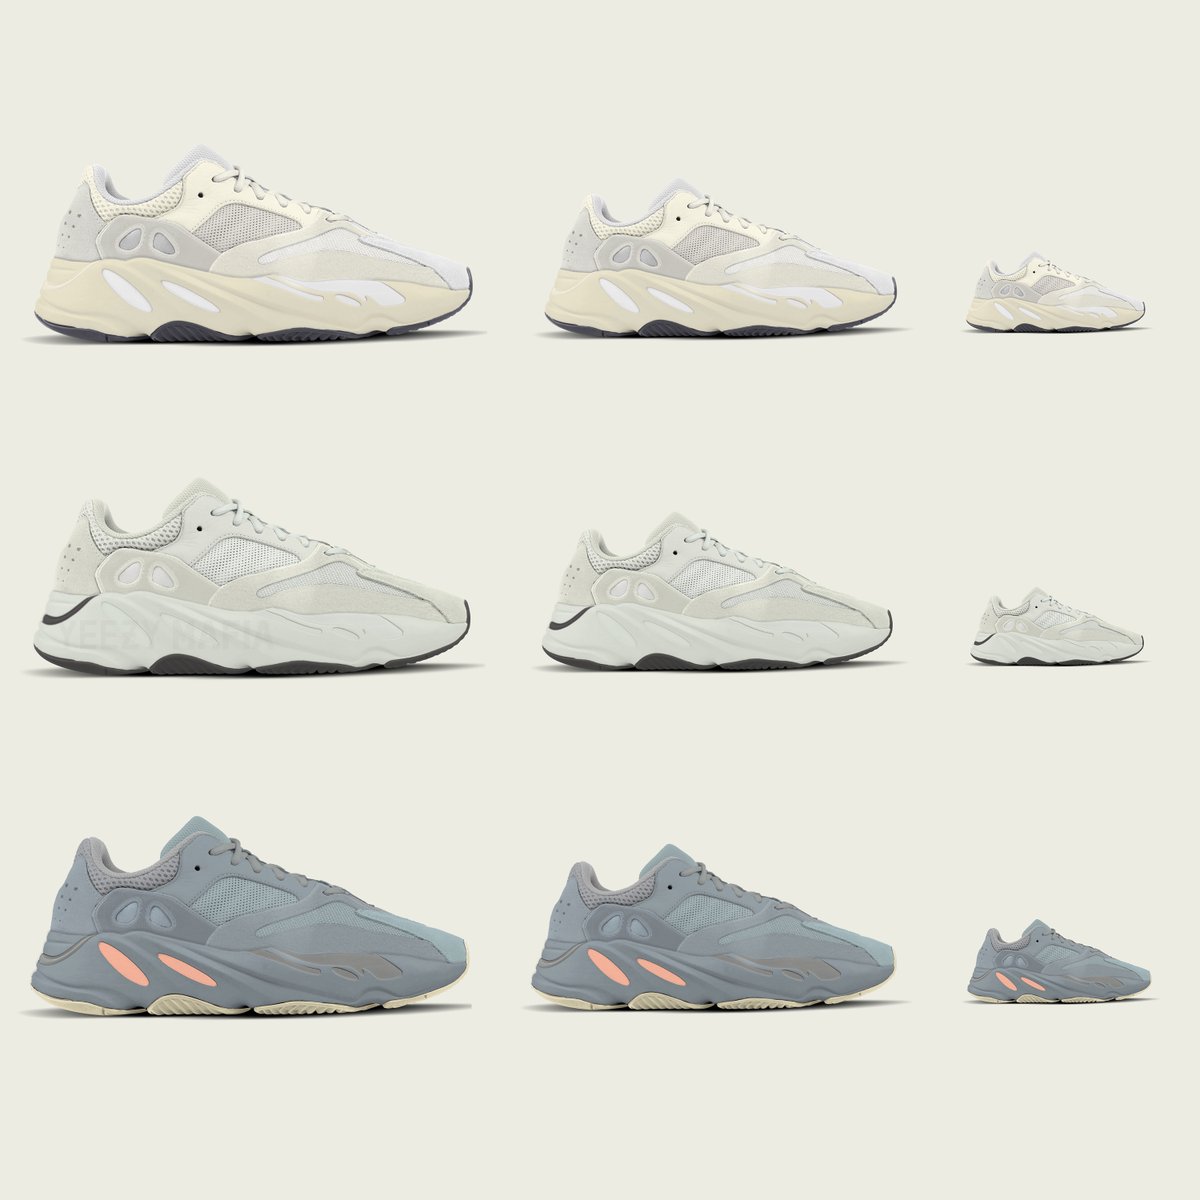 yeezy boost toddler sizes